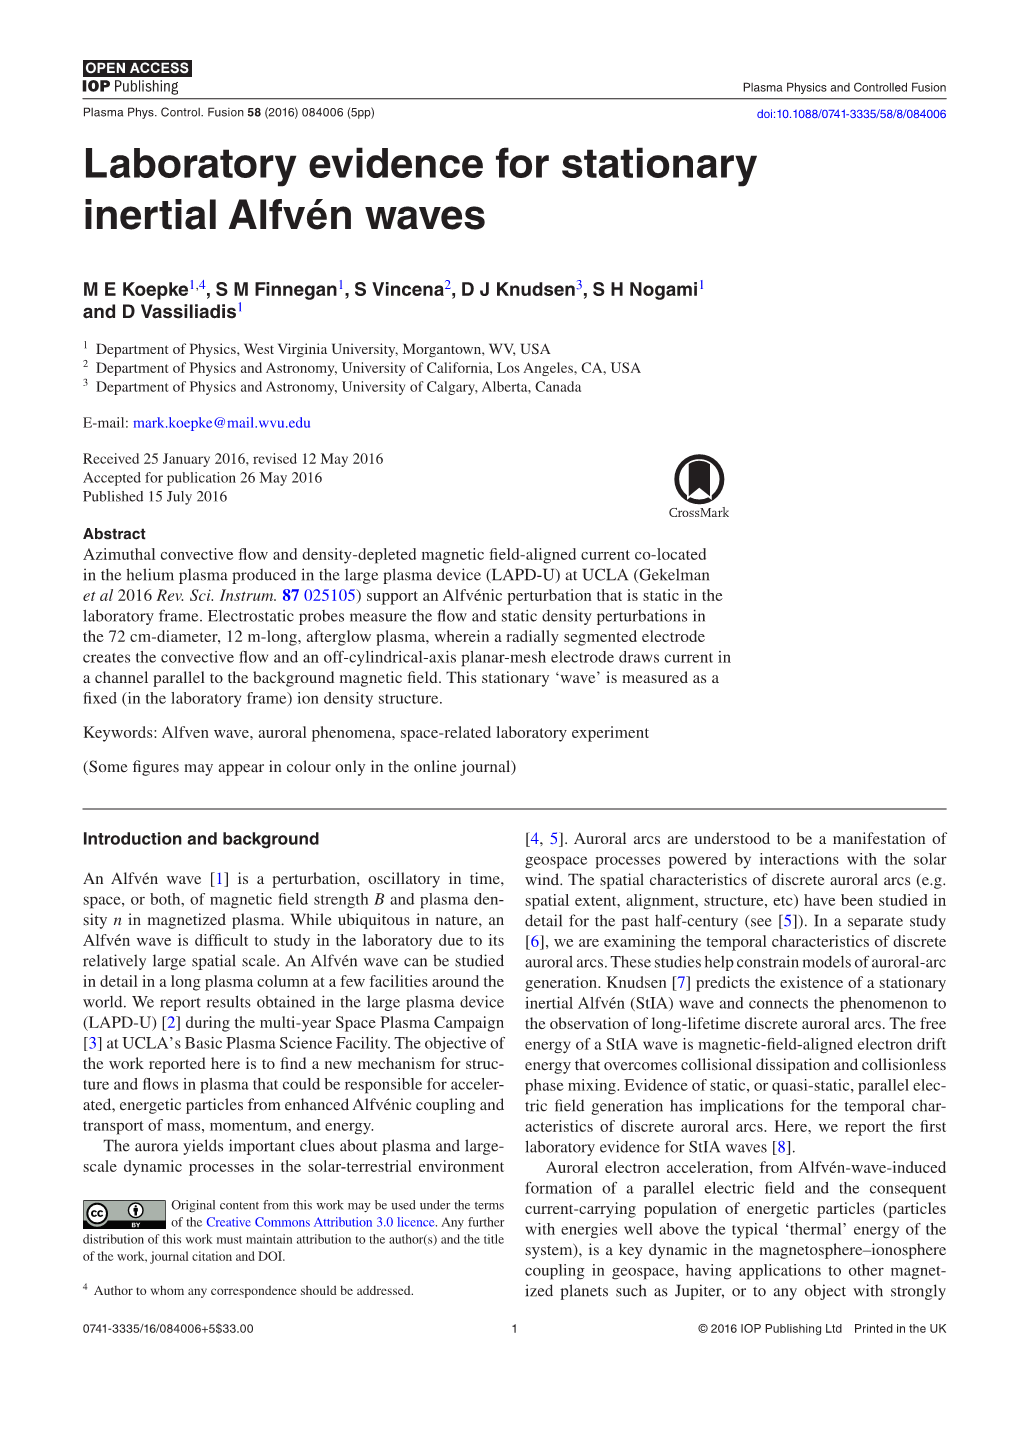 Laboratory Evidence for Stationary Inertial Alfvén Waves